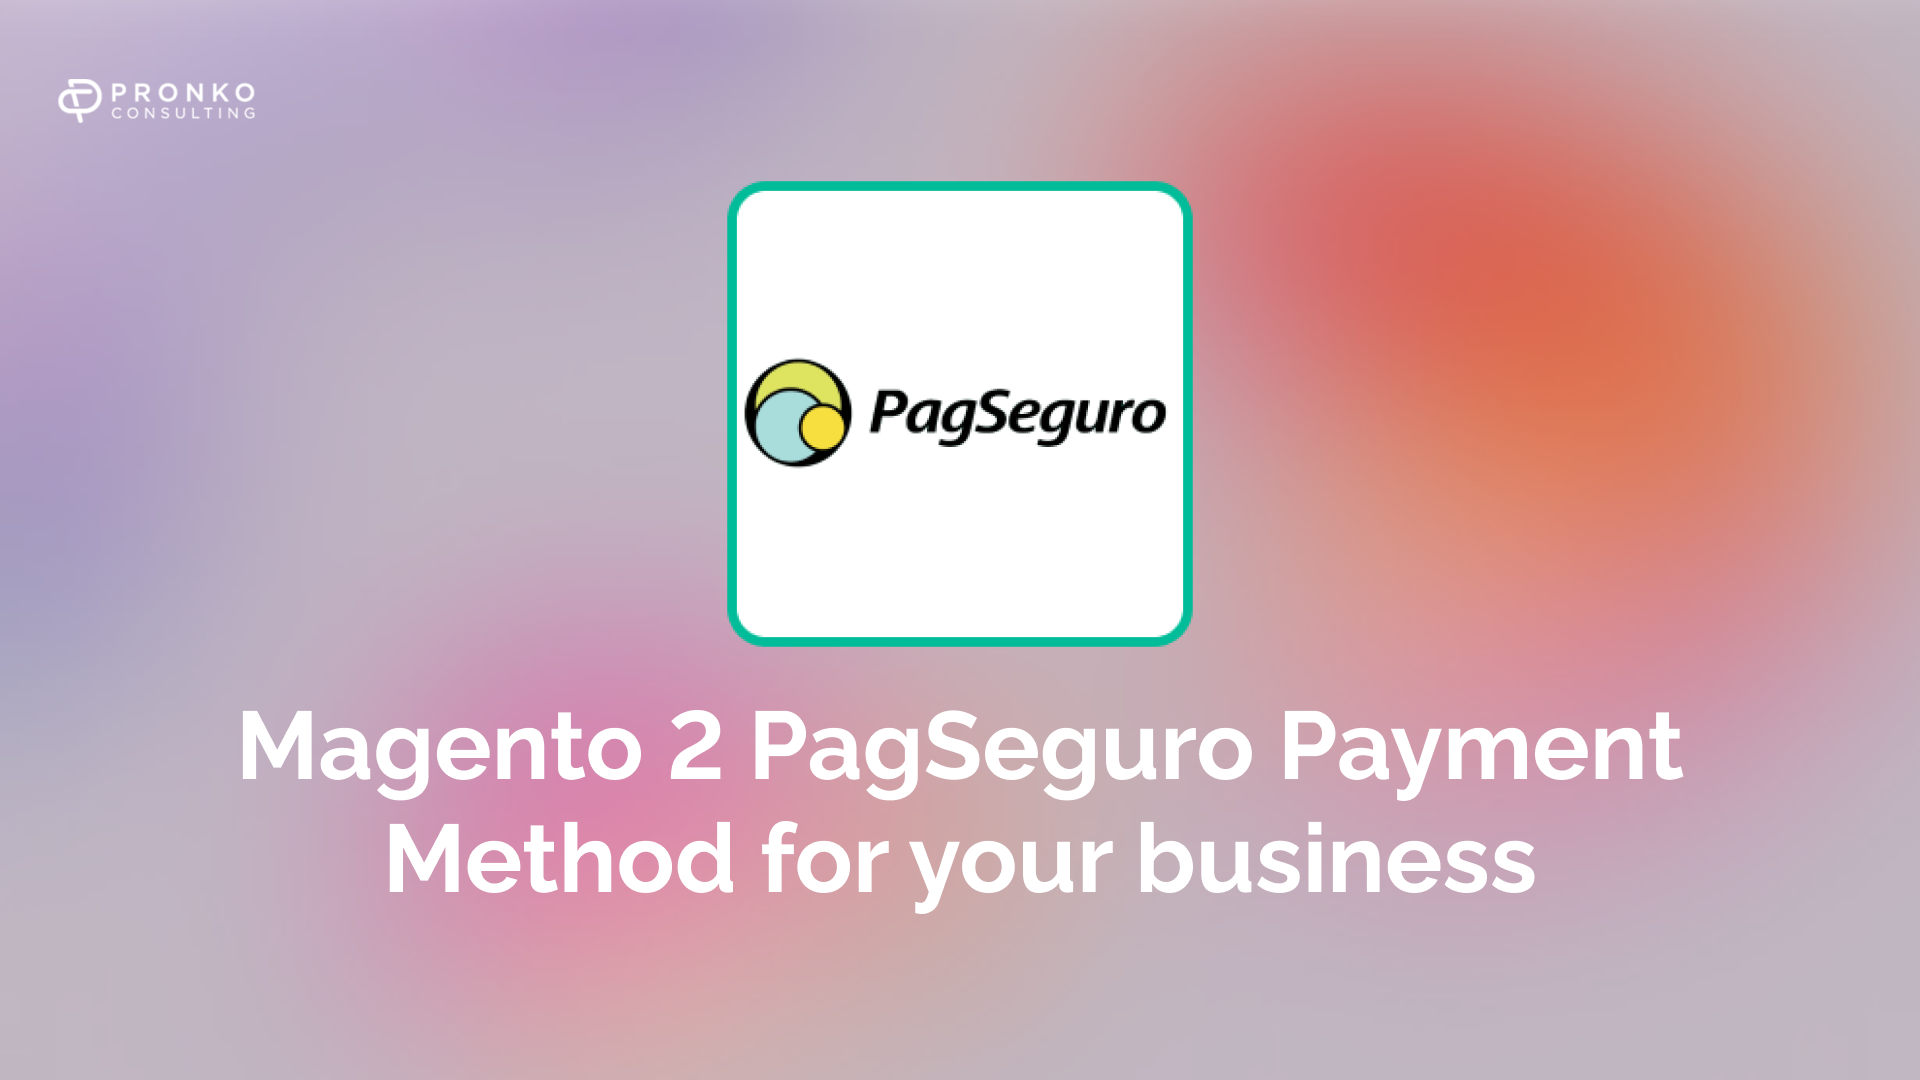 How to use Magento 2 PagSeguro Payment Method on your website?